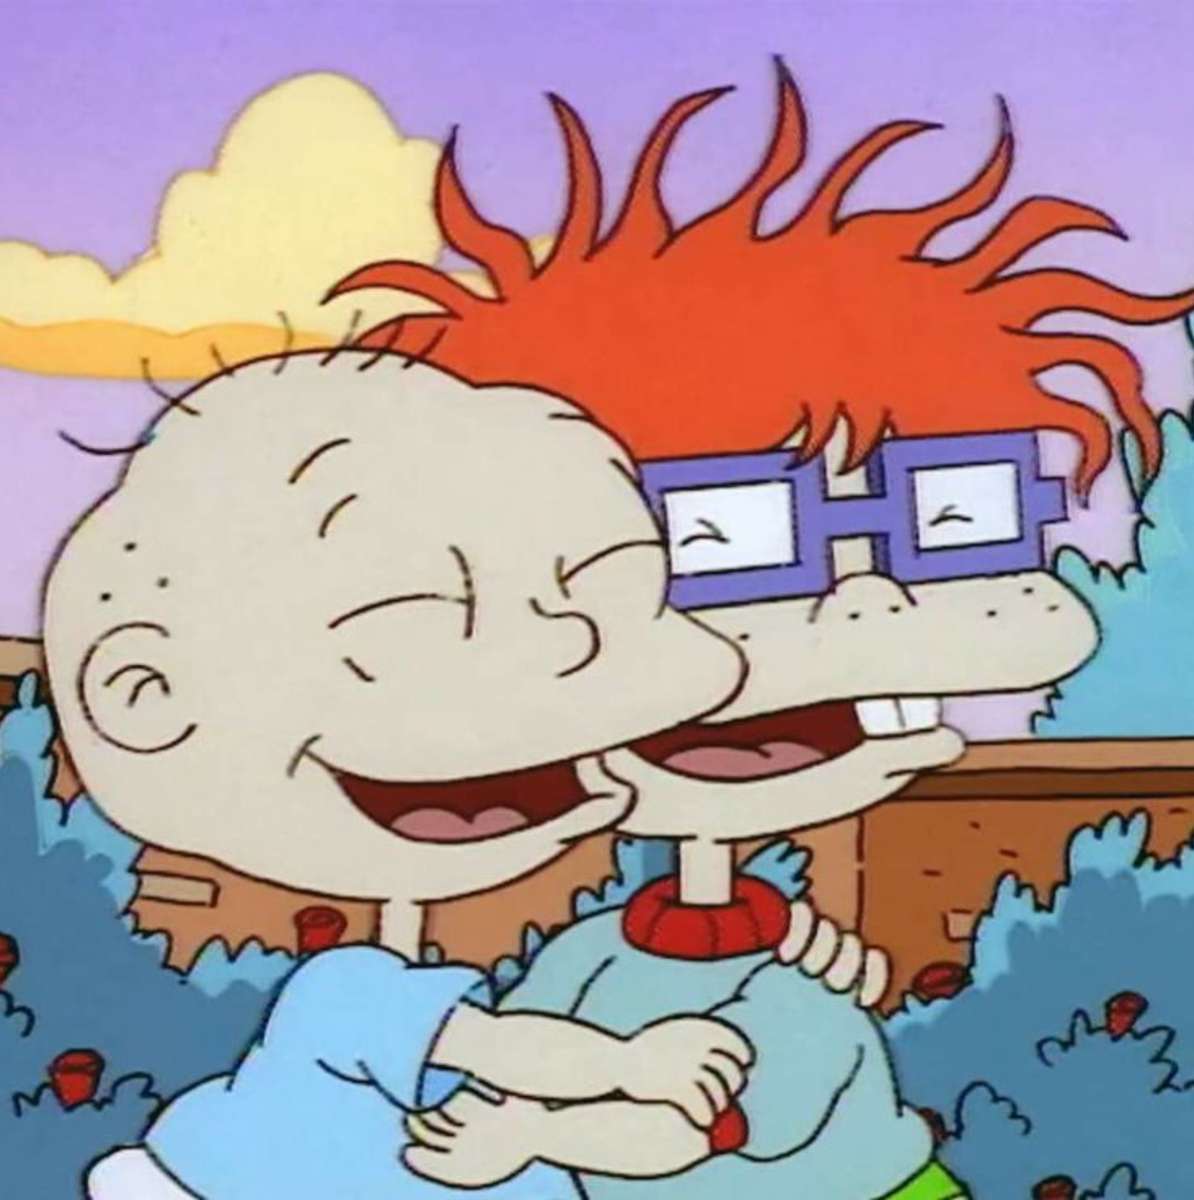 Tommy a Chuckie! ❤️❤️❤️❤️❤️❤️ online puzzle